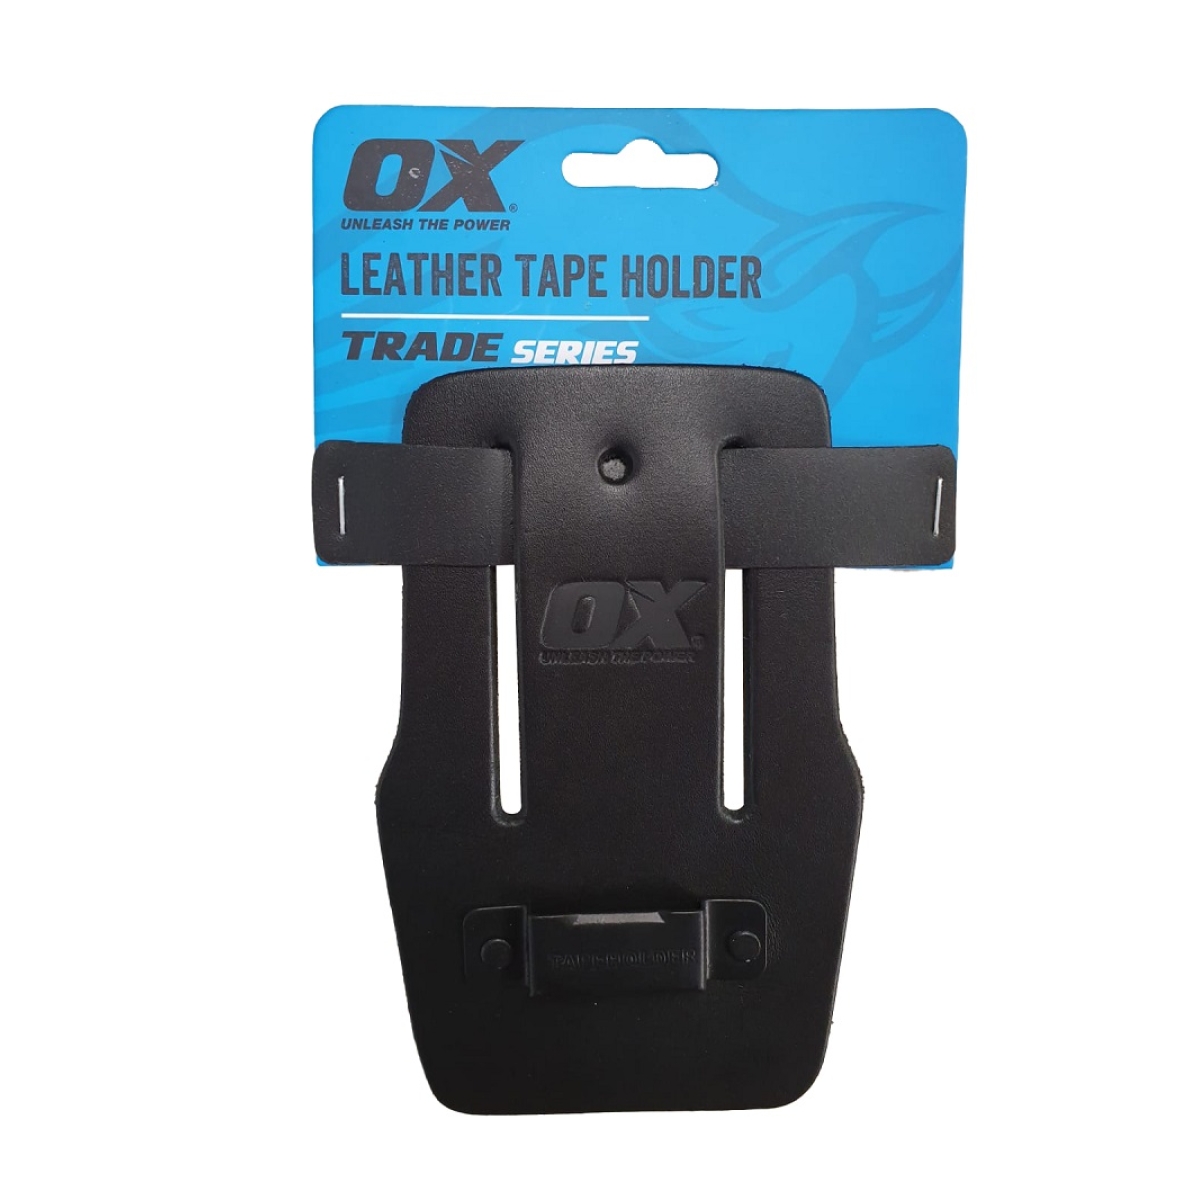 OX Trade Black Leather Tape Holder